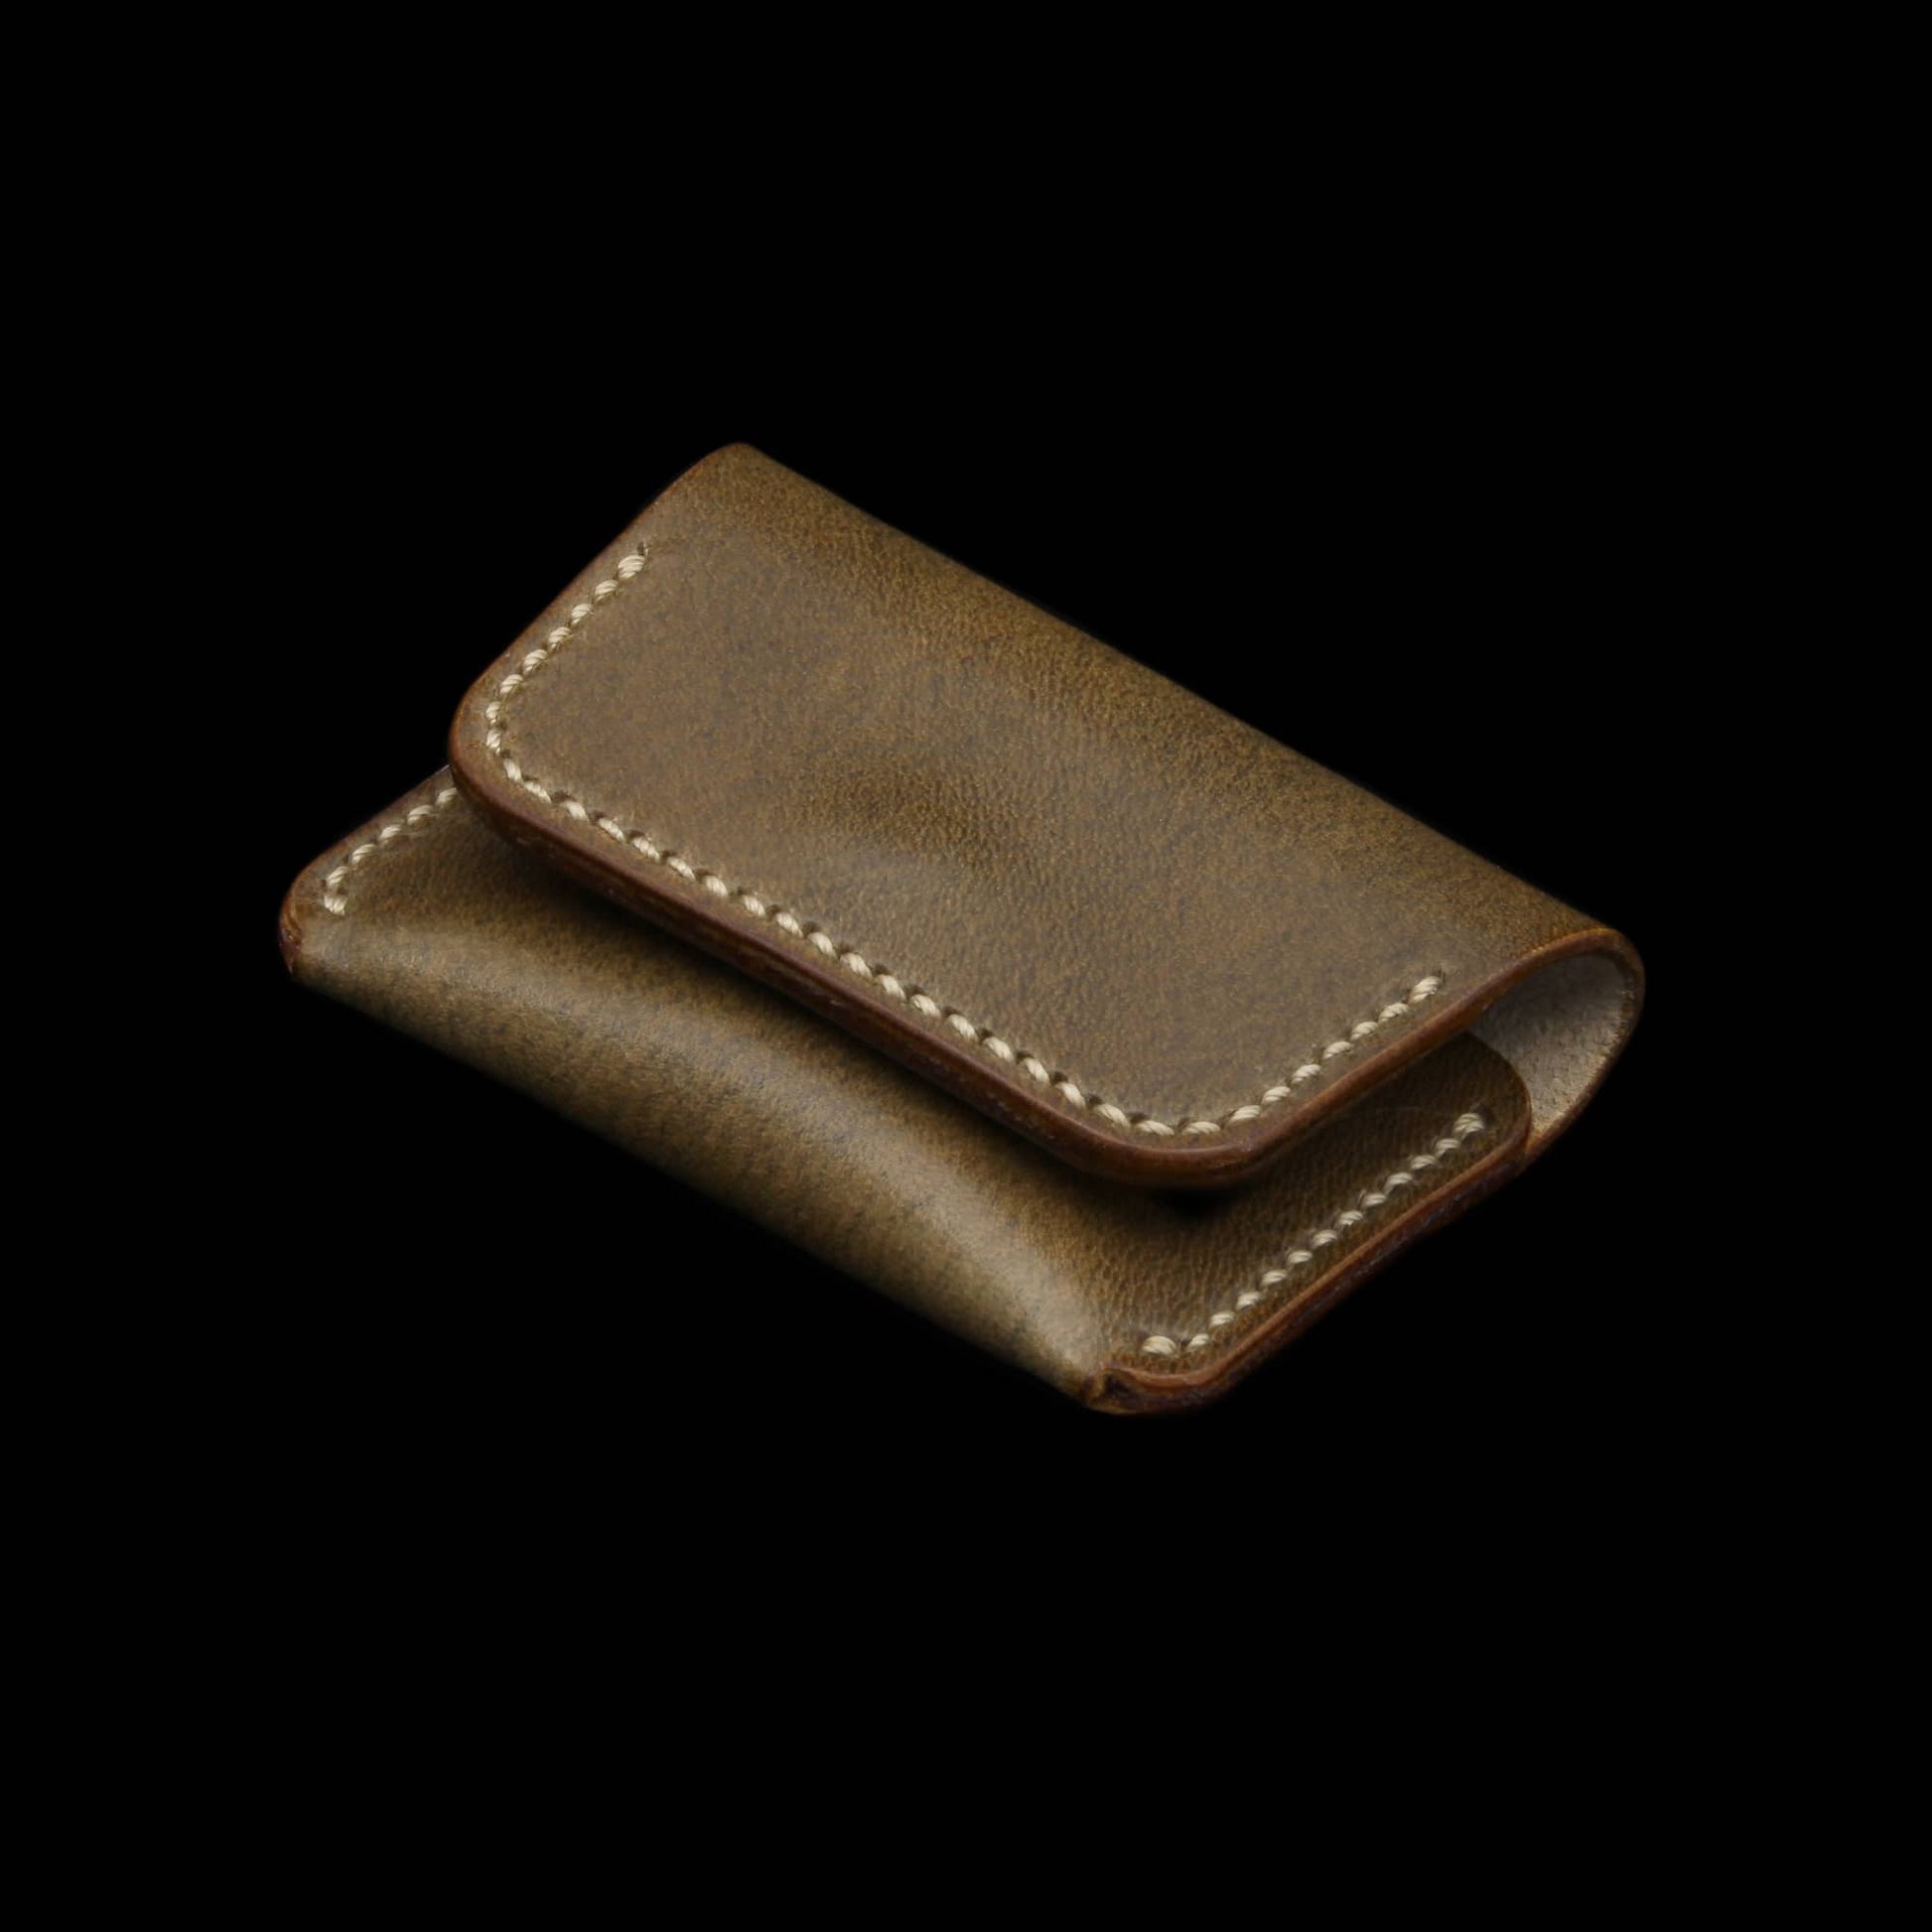 Leather Coin Purse, Sequoia 104 | Cozy Handmade